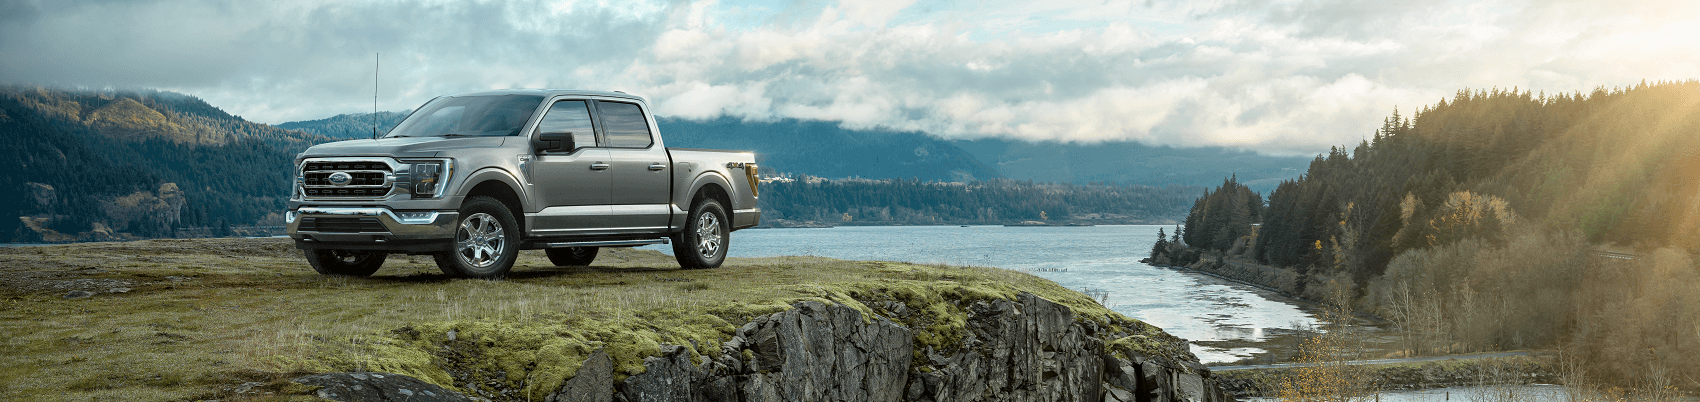 Ford F-150 Parked on Cliffside 